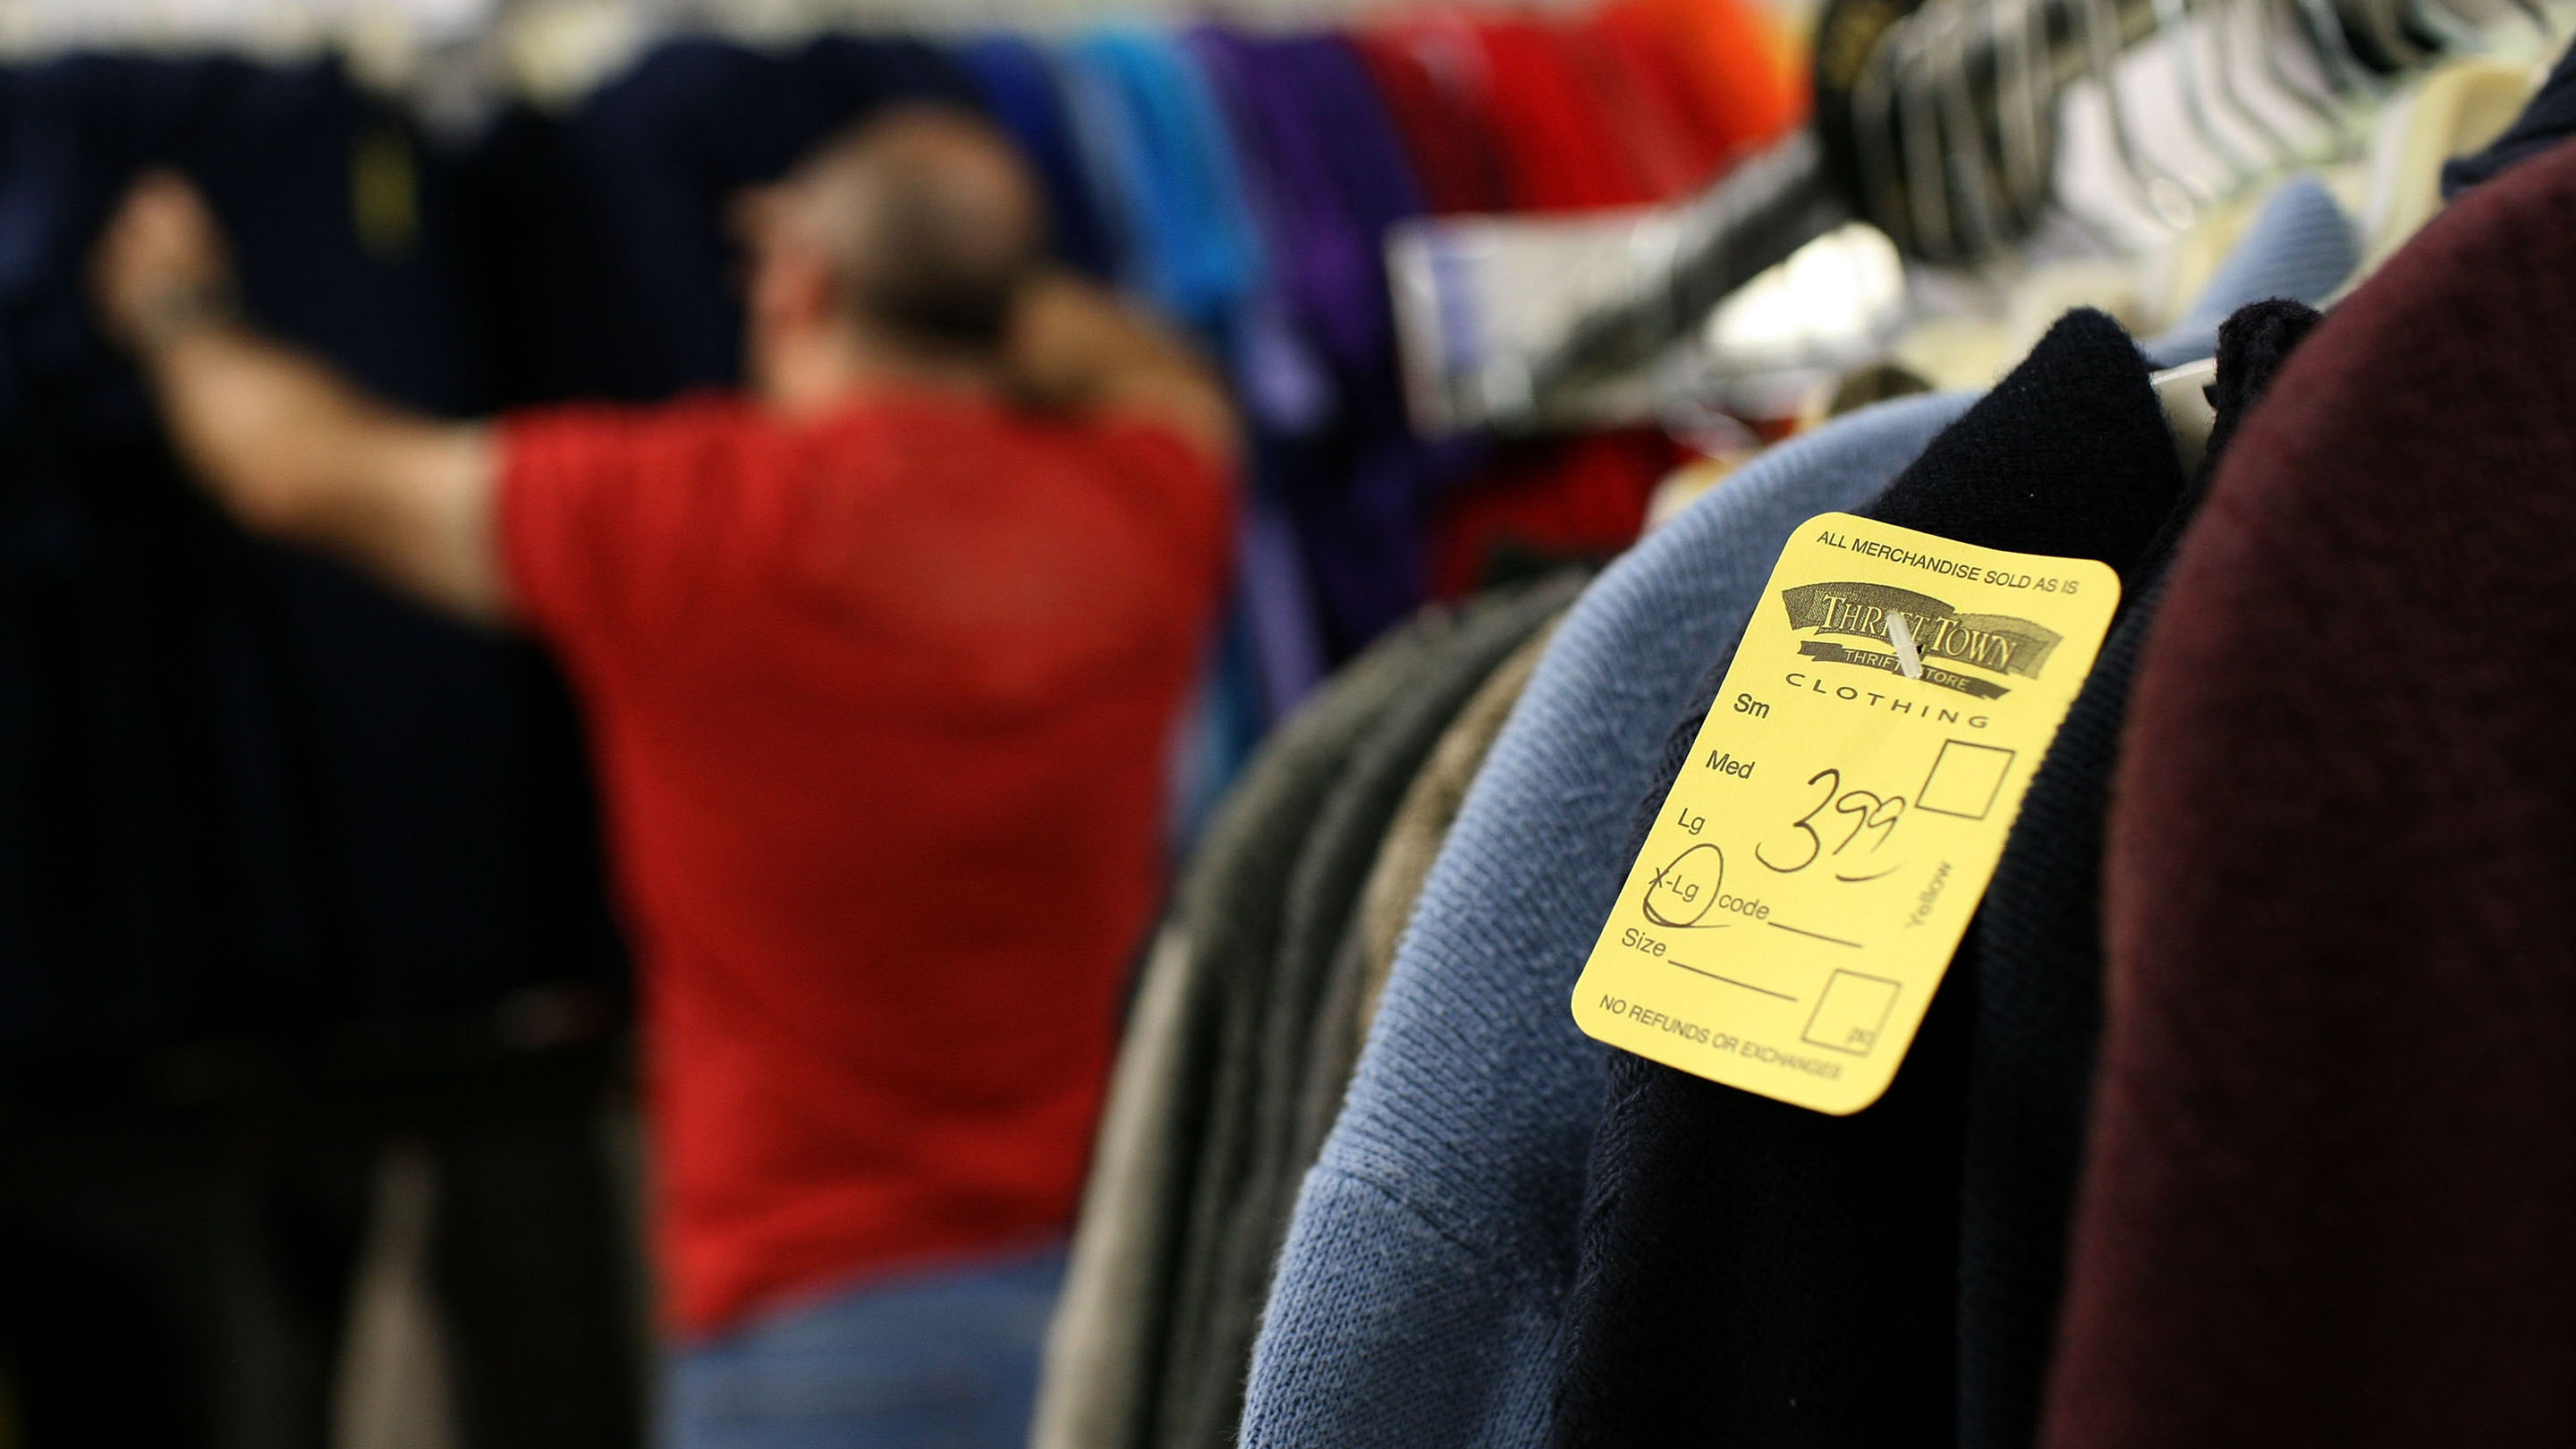 33 Second Hand Stores For The Best Online Thrift Shopping